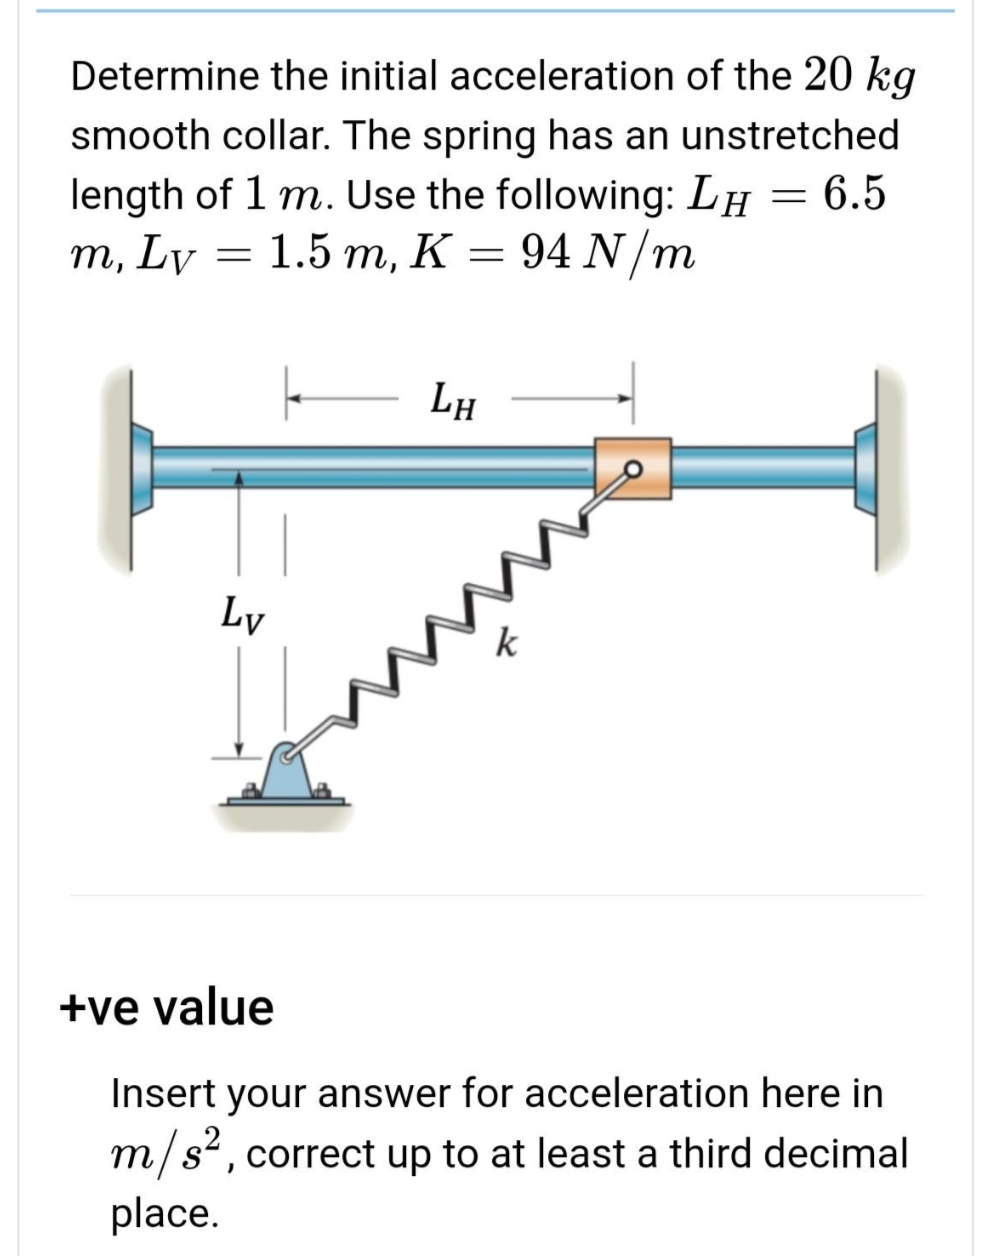 Determine the initial acceleration of the 20 kg
smooth collar. The spring has an unstretched
length of 1 m. Use the following: LH = 6.5
m, Ly = 1.5 m, K = 94 N/m
Ly
LH
O
+ve value
Insert your answer for acceleration here in
m/s², correct up to at least a third decimal
place.